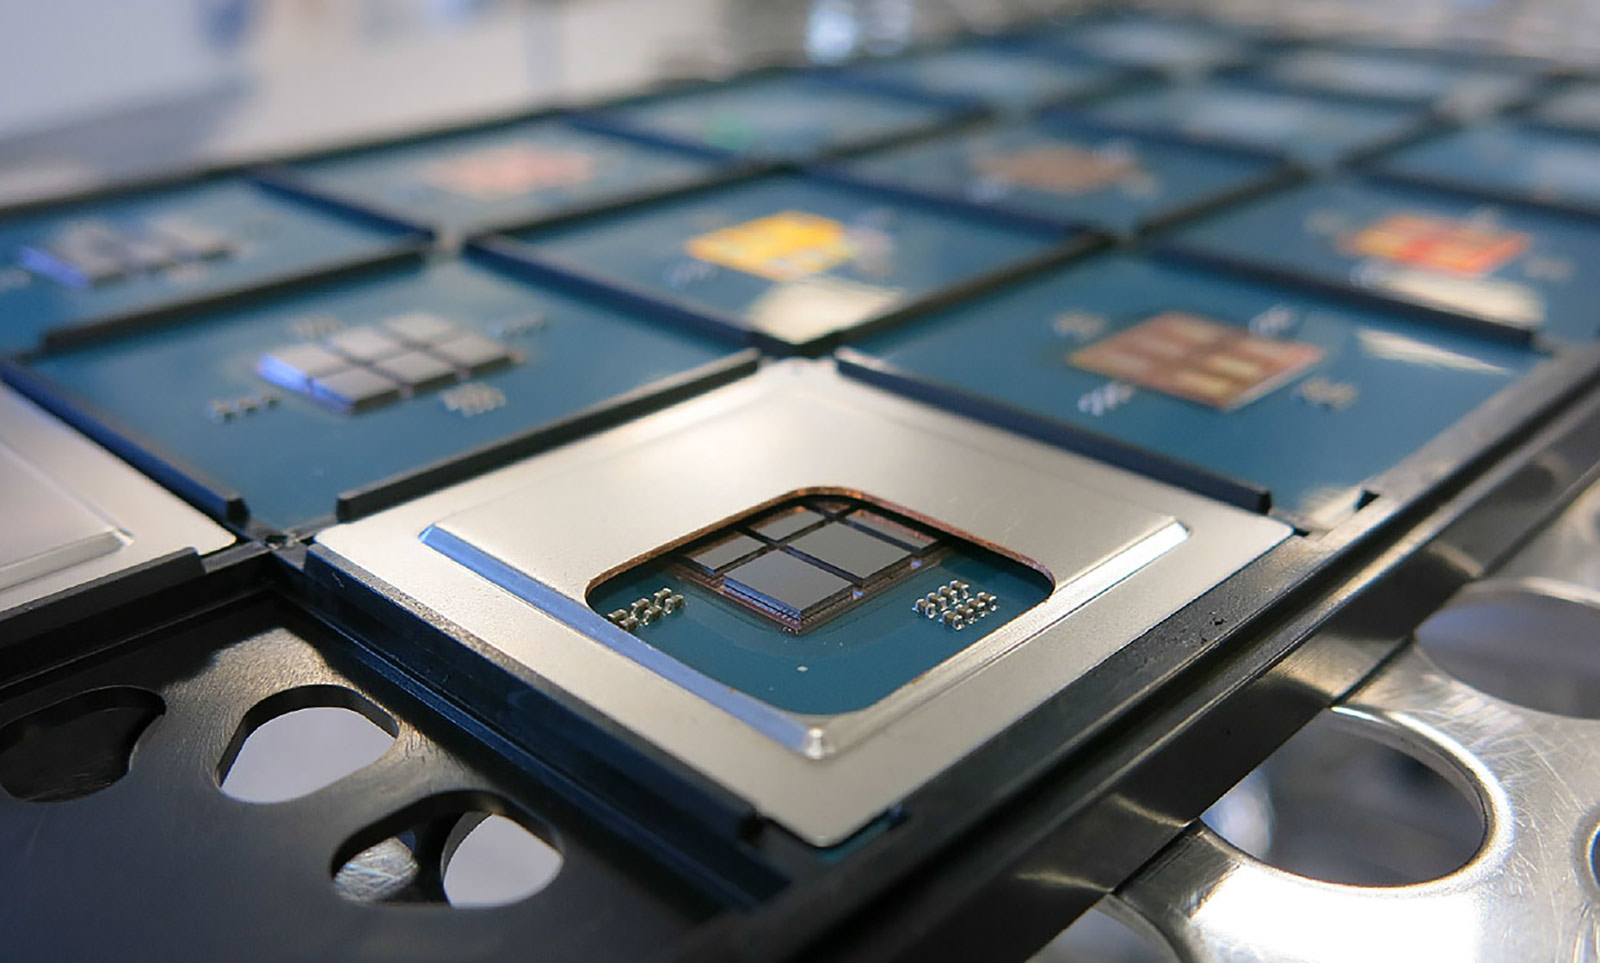 96-core processor on six chips.